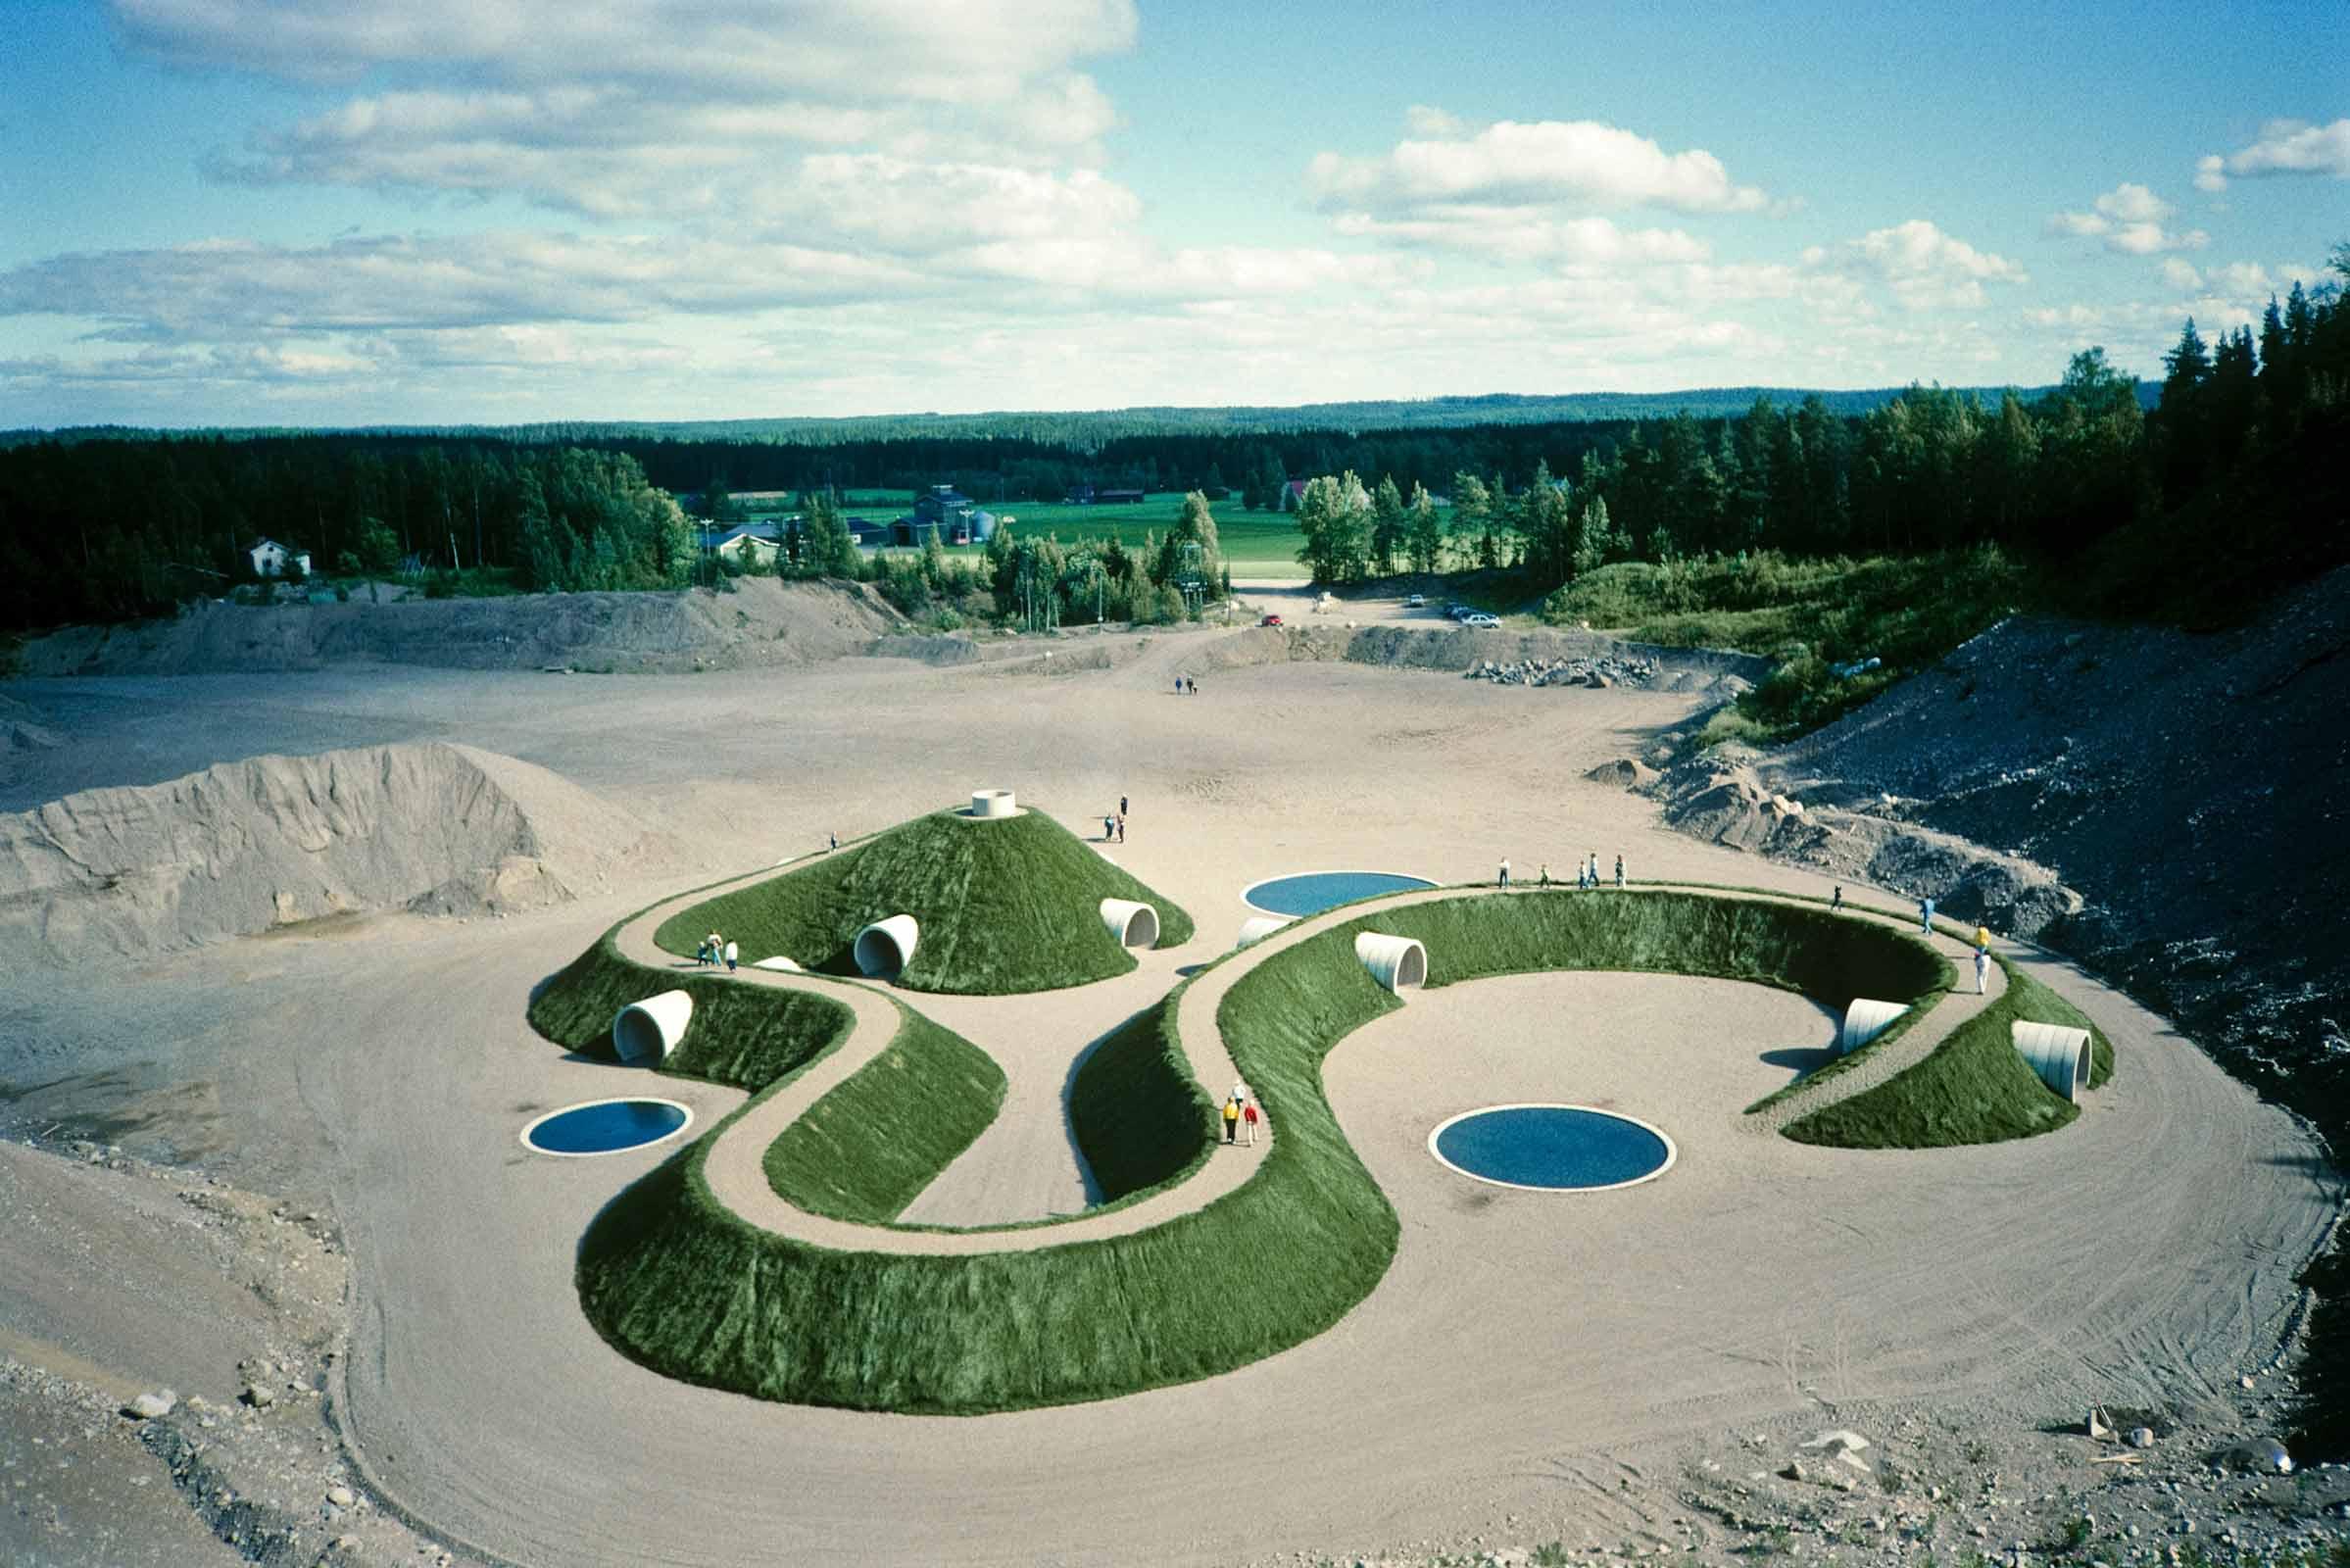 large earthwork sculpture made using earth, concrete, water, and grass with people moving around on top of it.